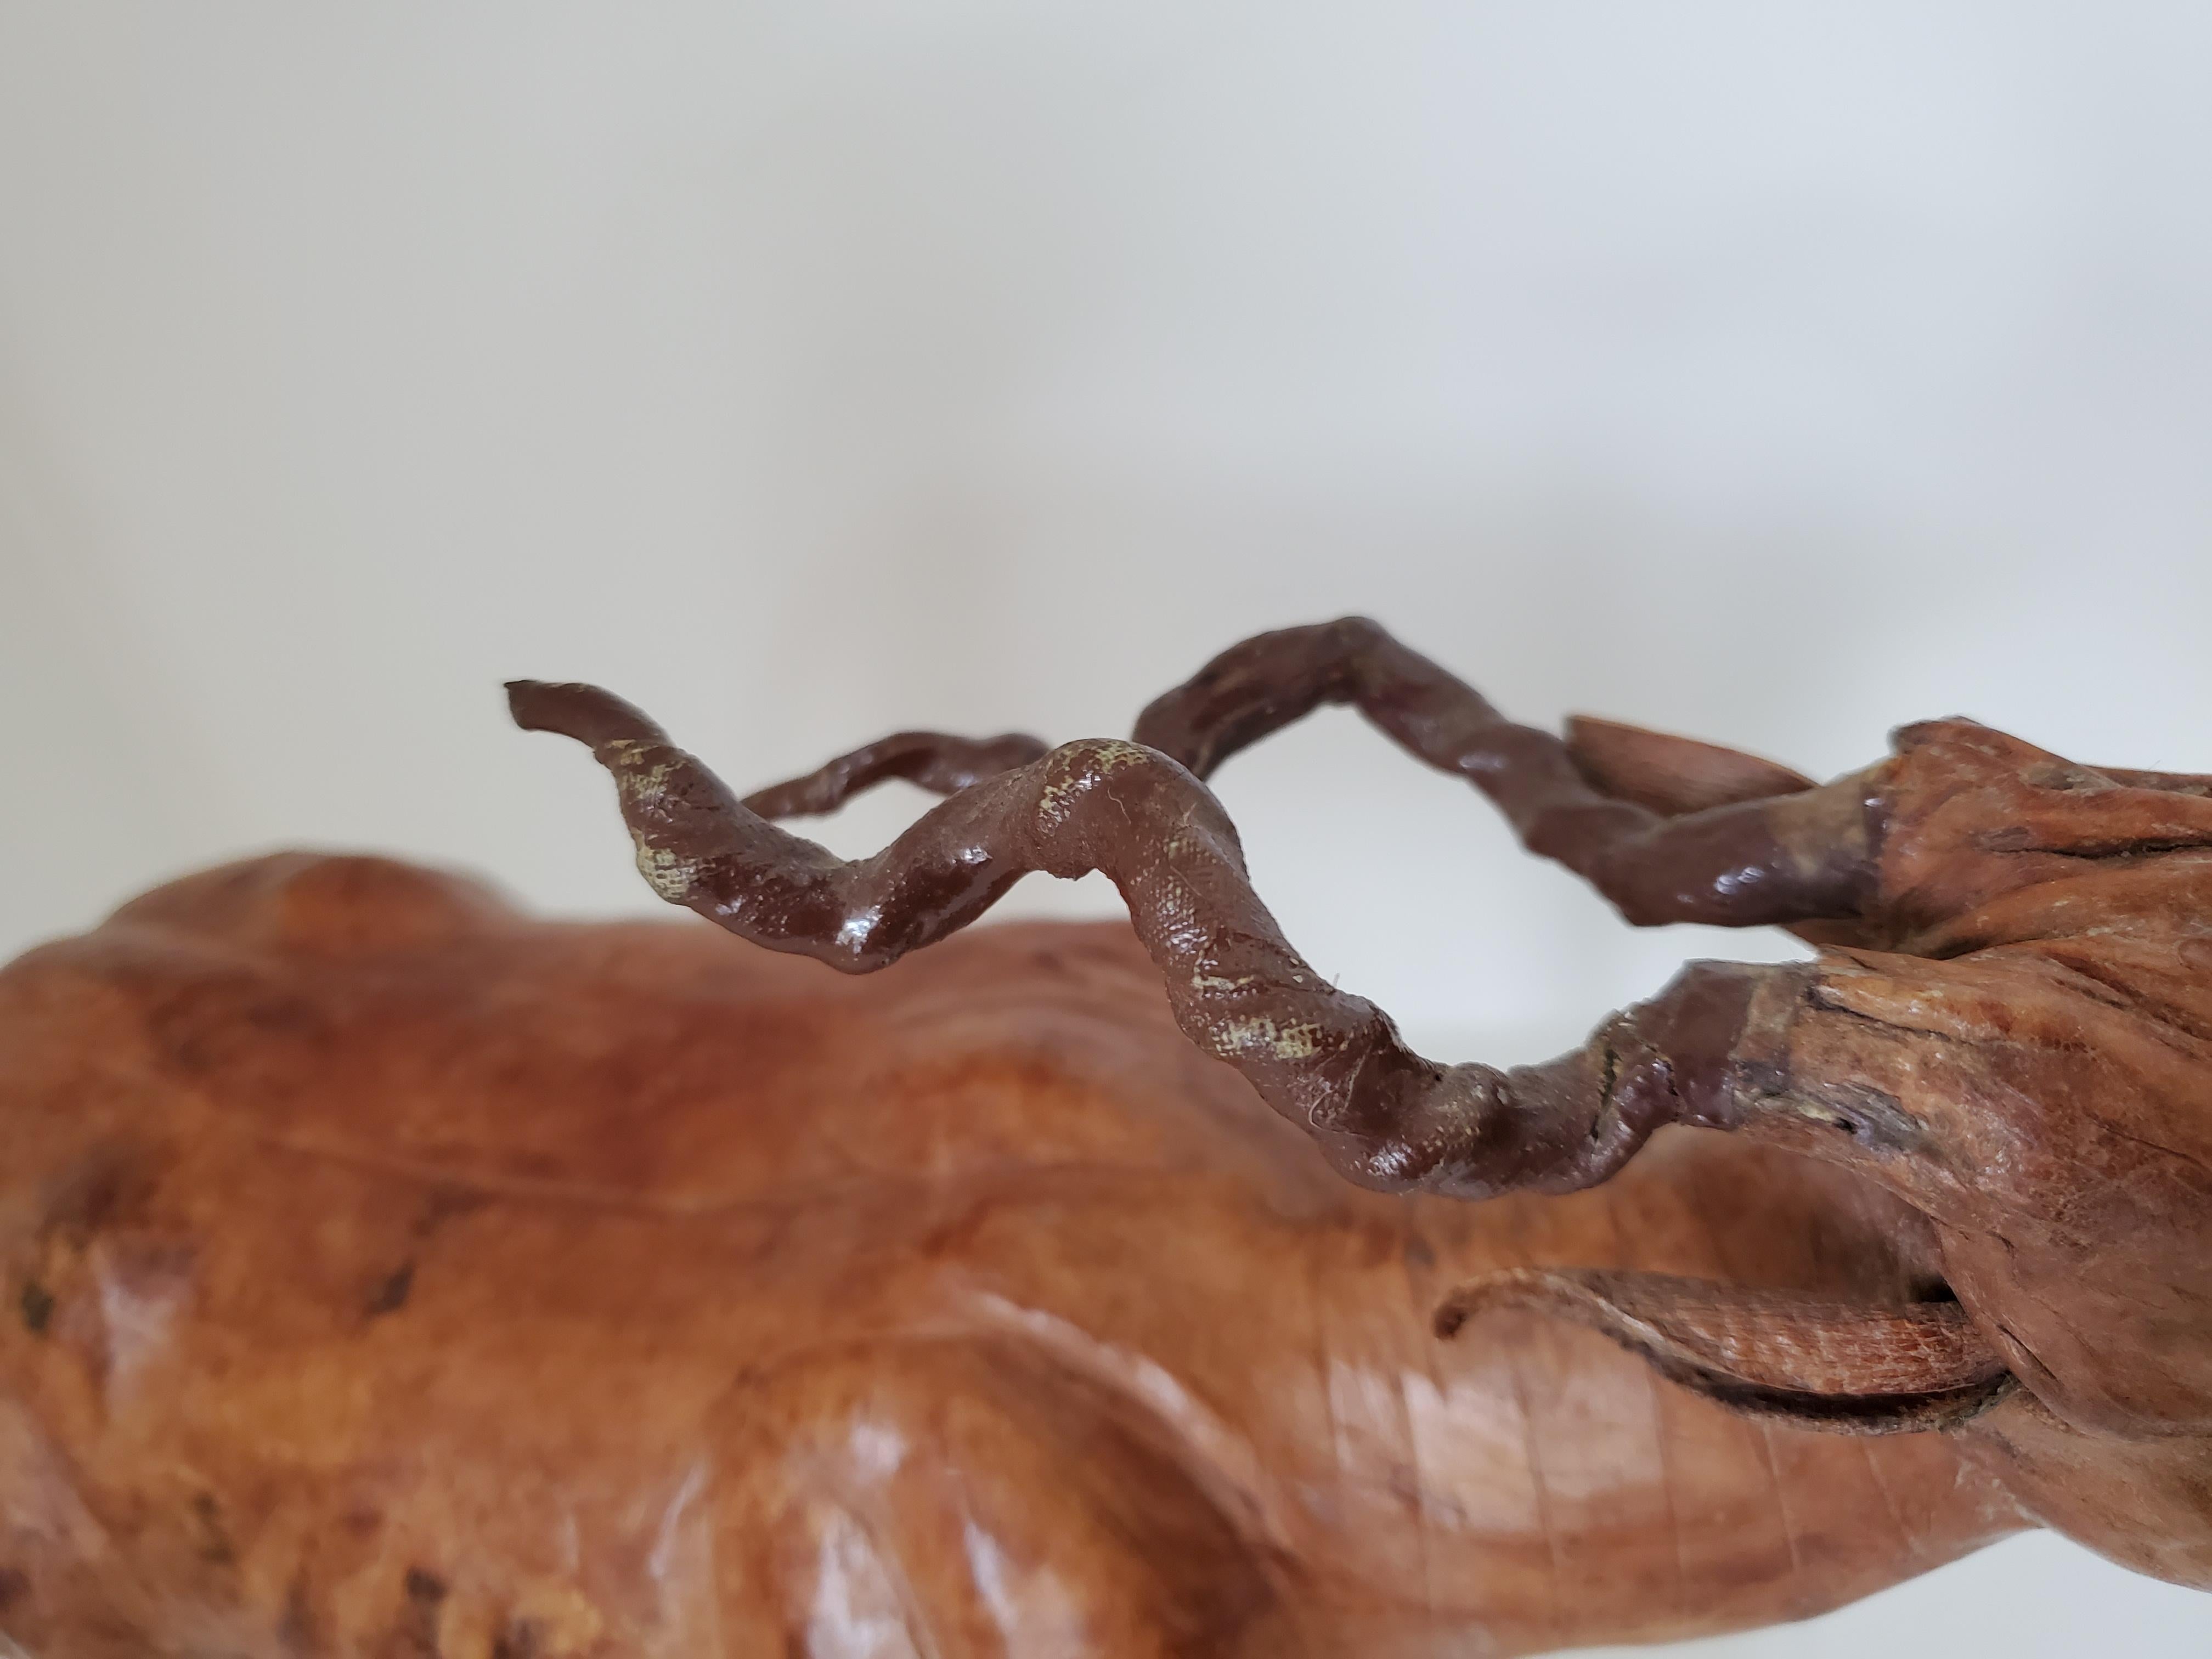 Dyed Vintage Sculpture - Wood and Leather Gazelle Likely from Liberty's London For Sale